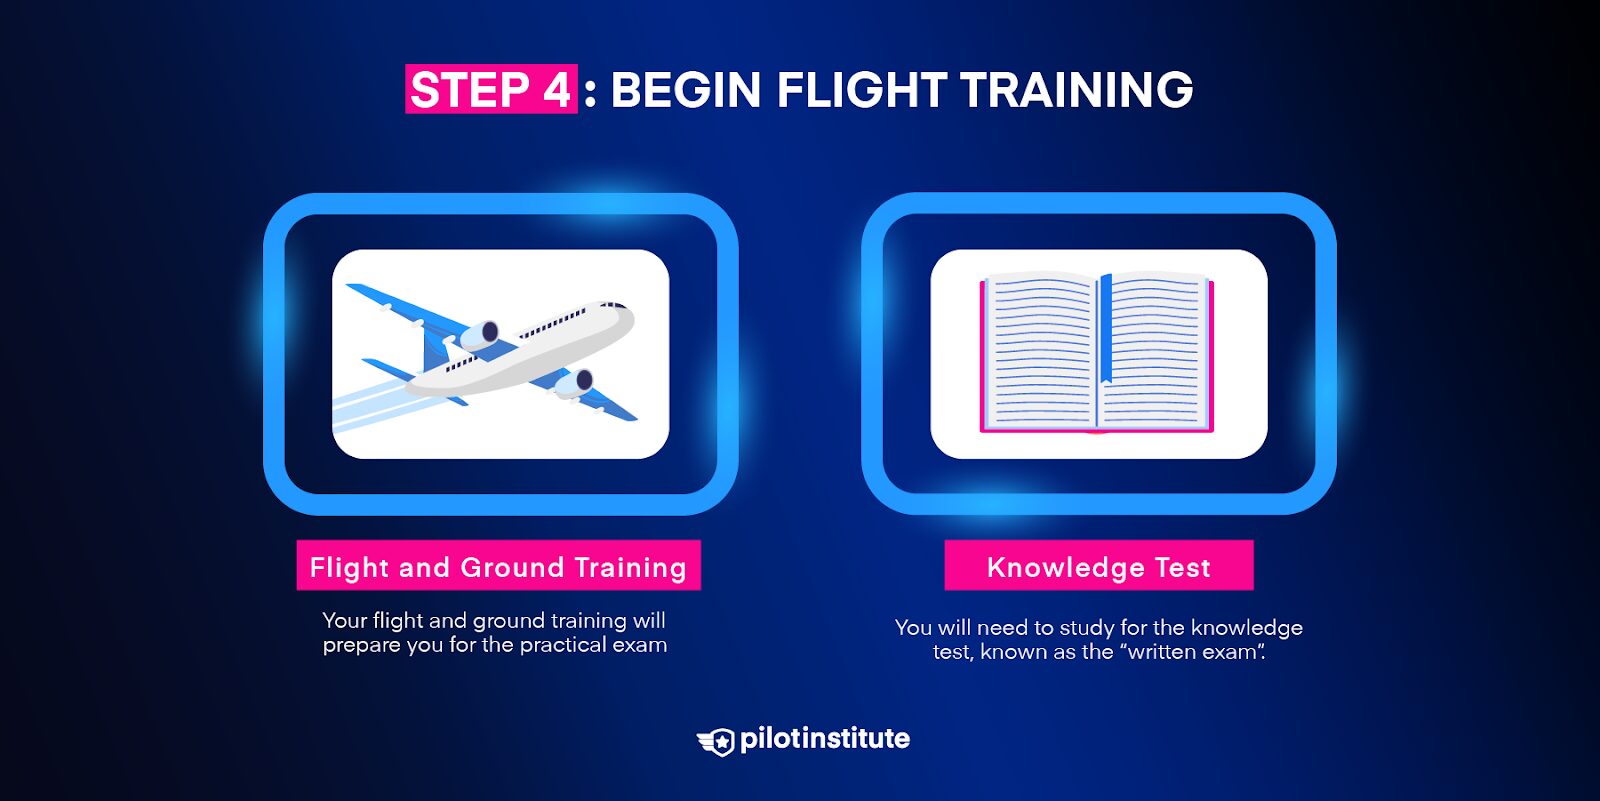 A diagram outlining the two parts of flight training.